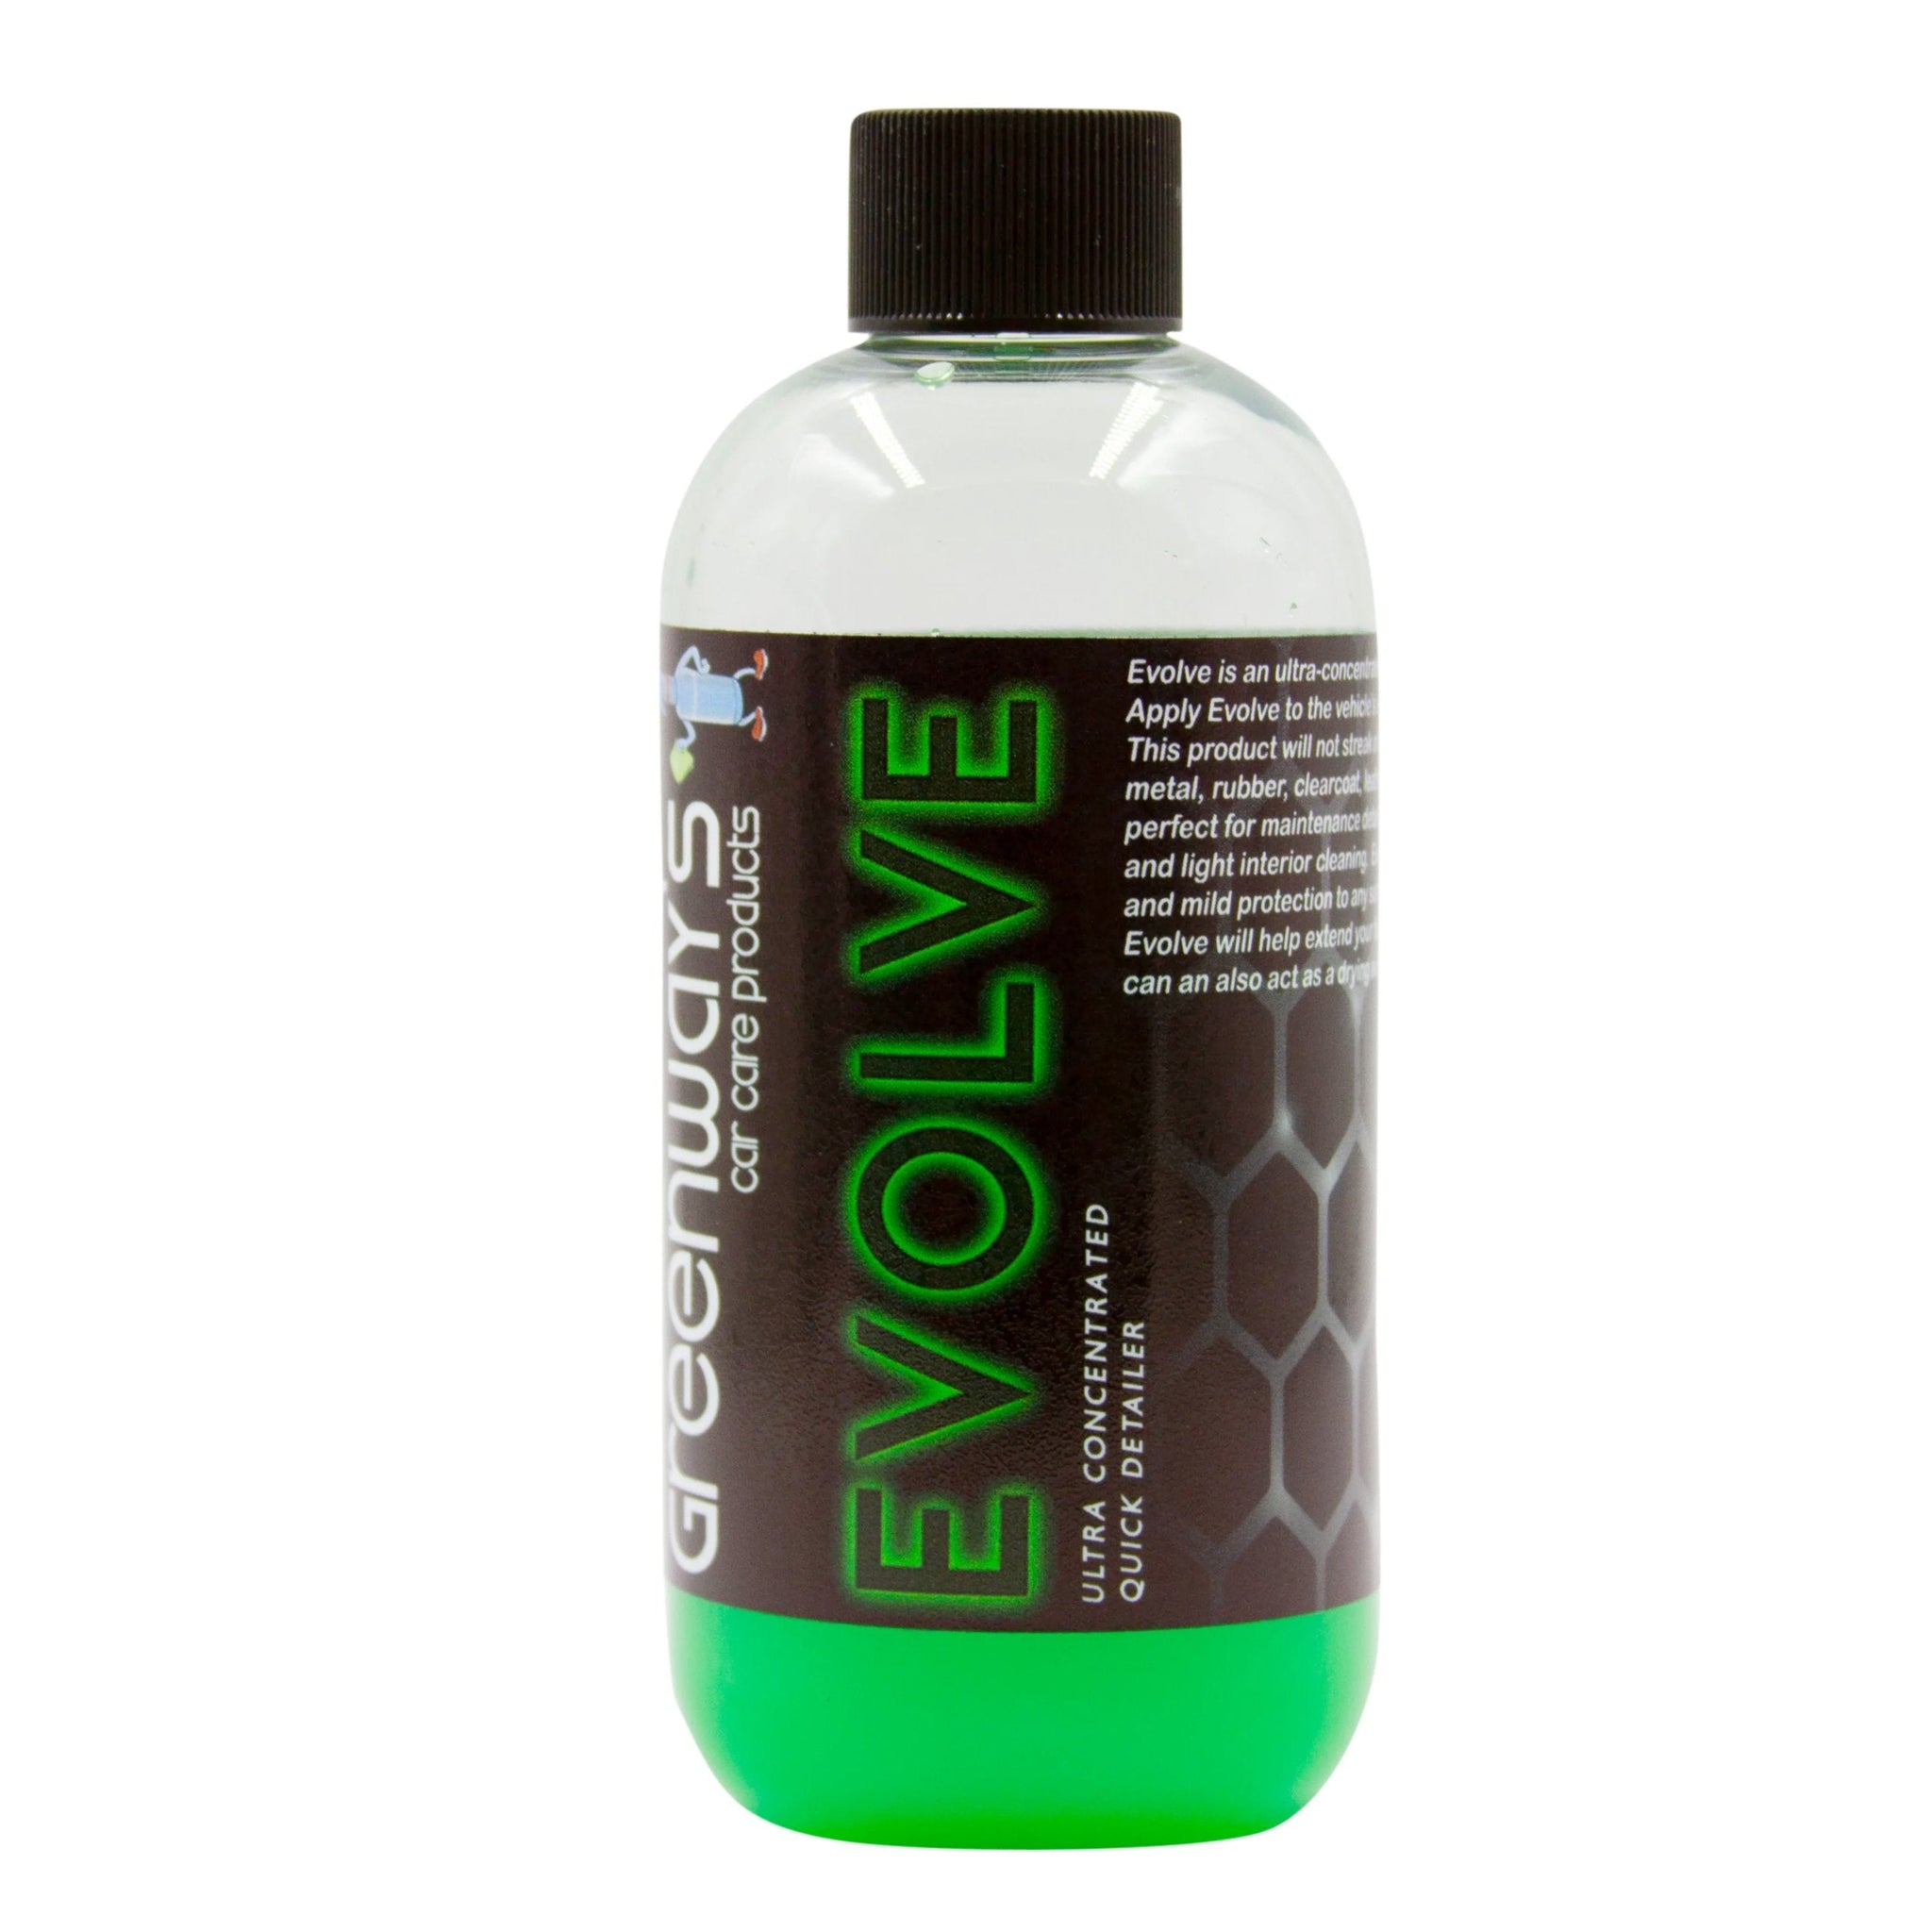 Evolve- Super Concentrated Spray Detailer- Use on Paint, Glass, Trim and Interior